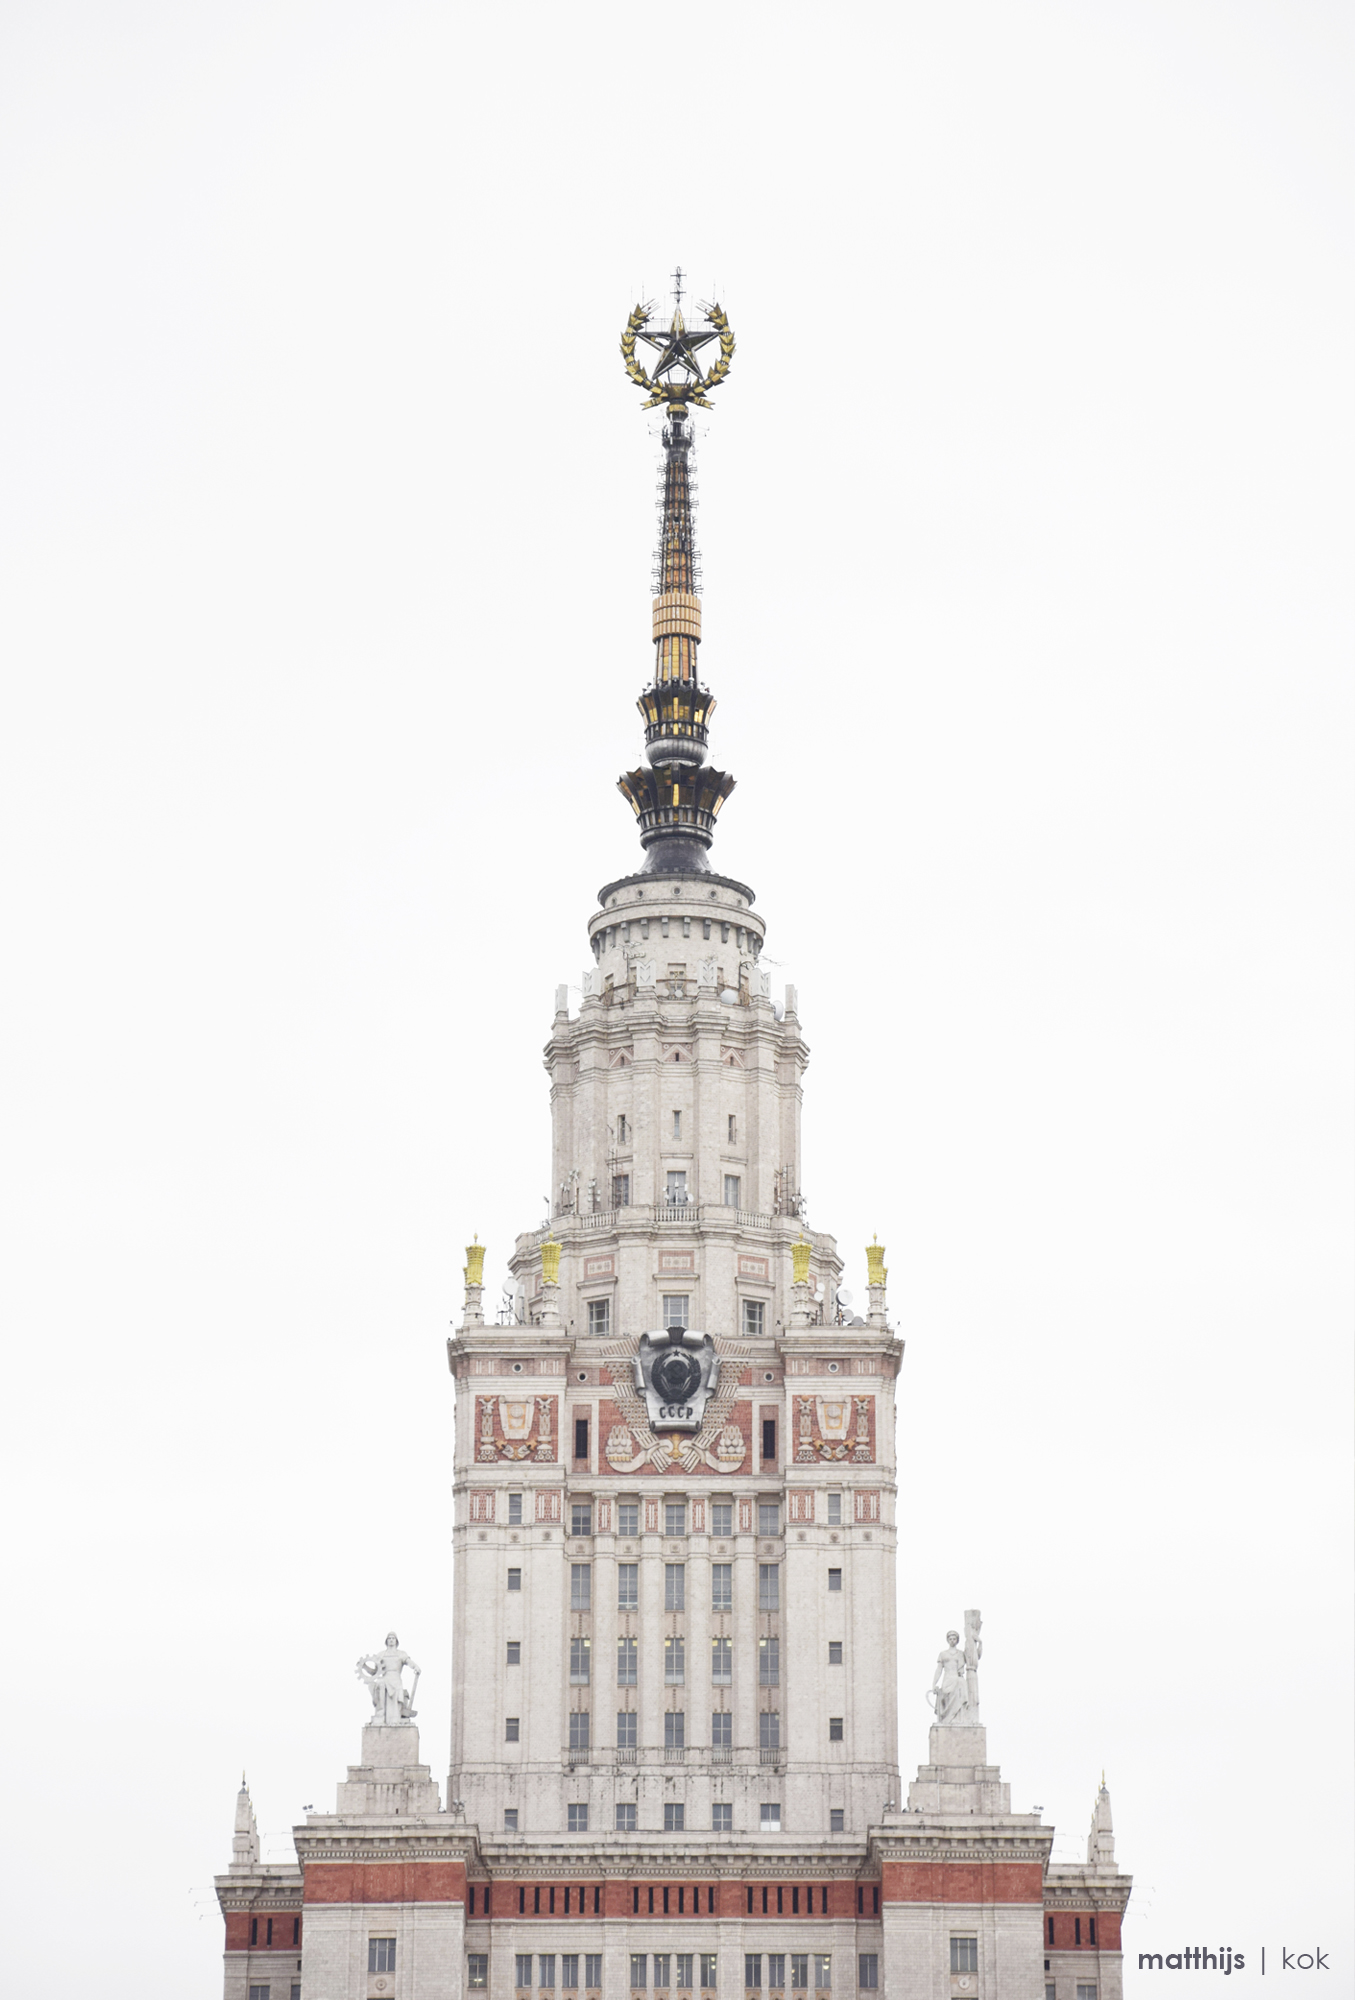 Moscow State University, Moscow | Photo by Matthijs Kok